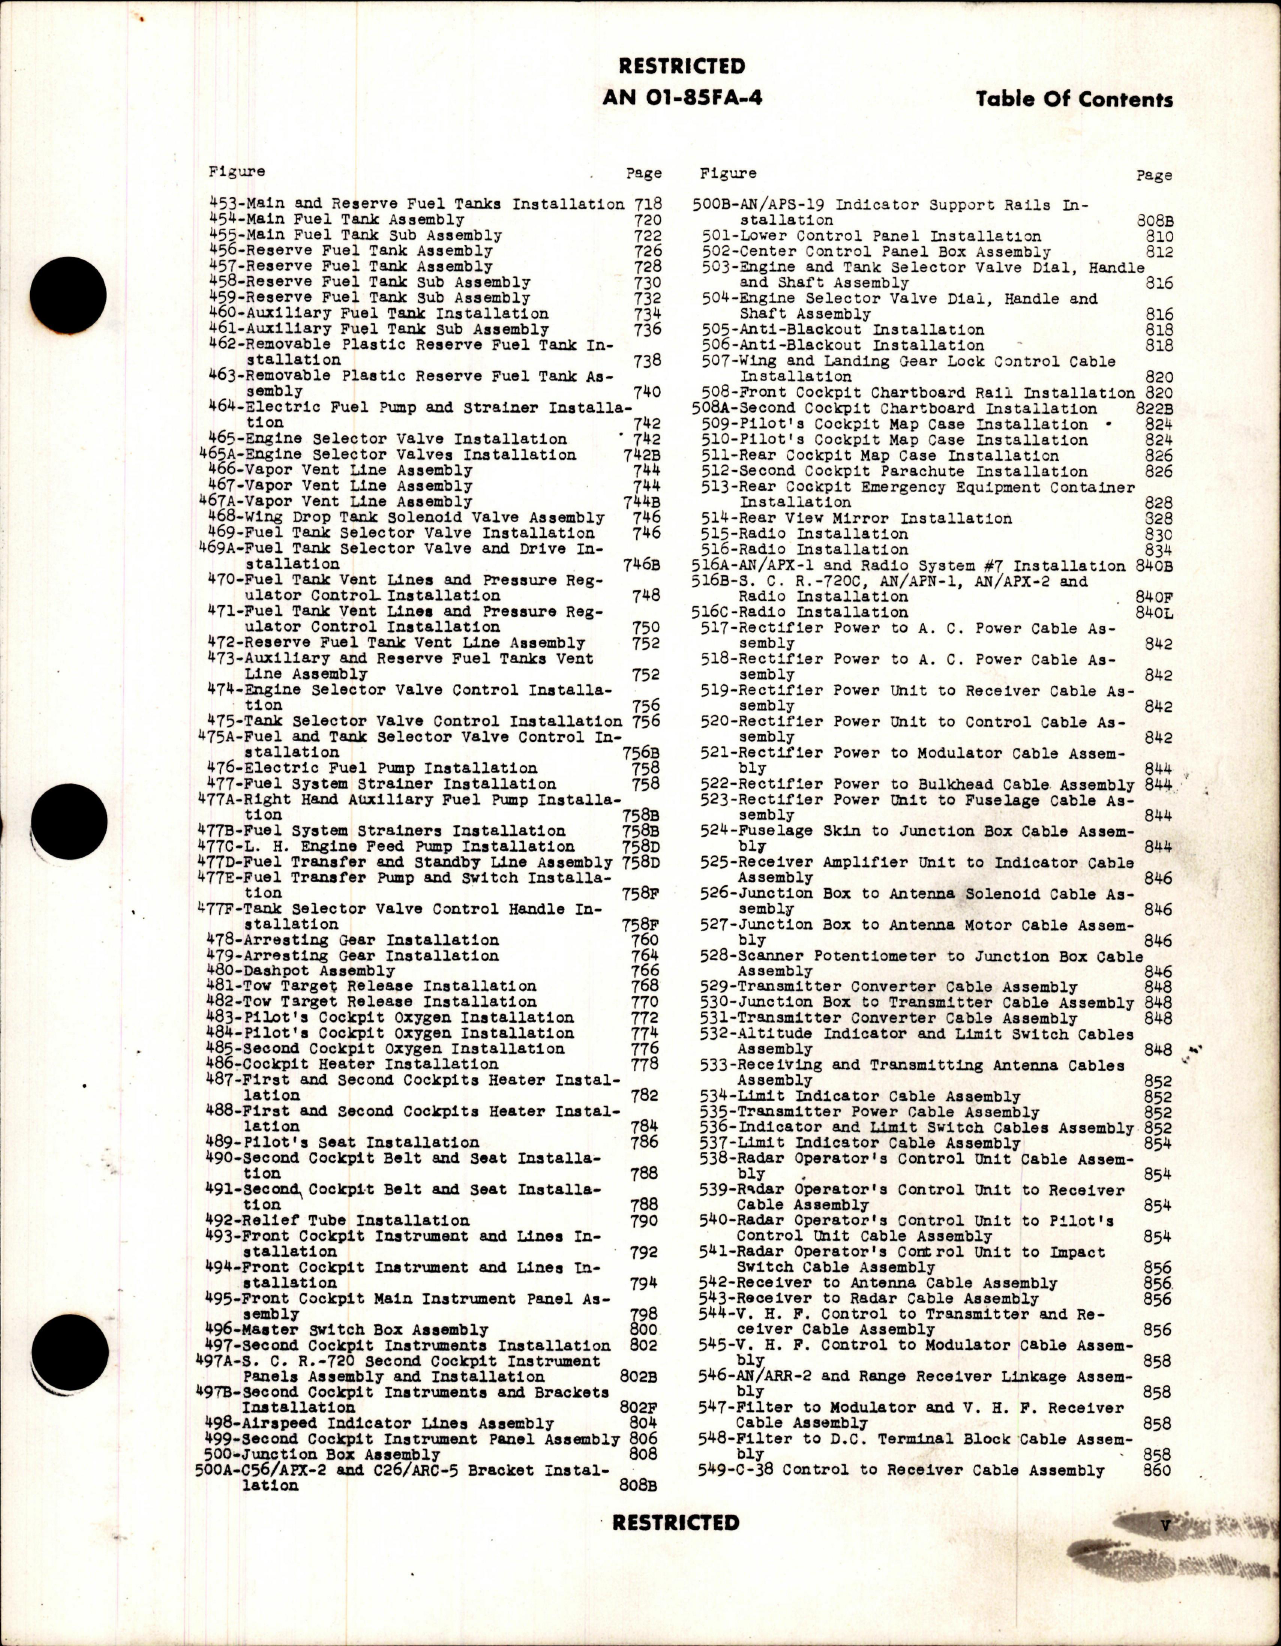 Sample page 7 from AirCorps Library document: Parts Catalog for F7F-1N, F7F-2N, F7F-3, F7F-3N, and F7F-4N